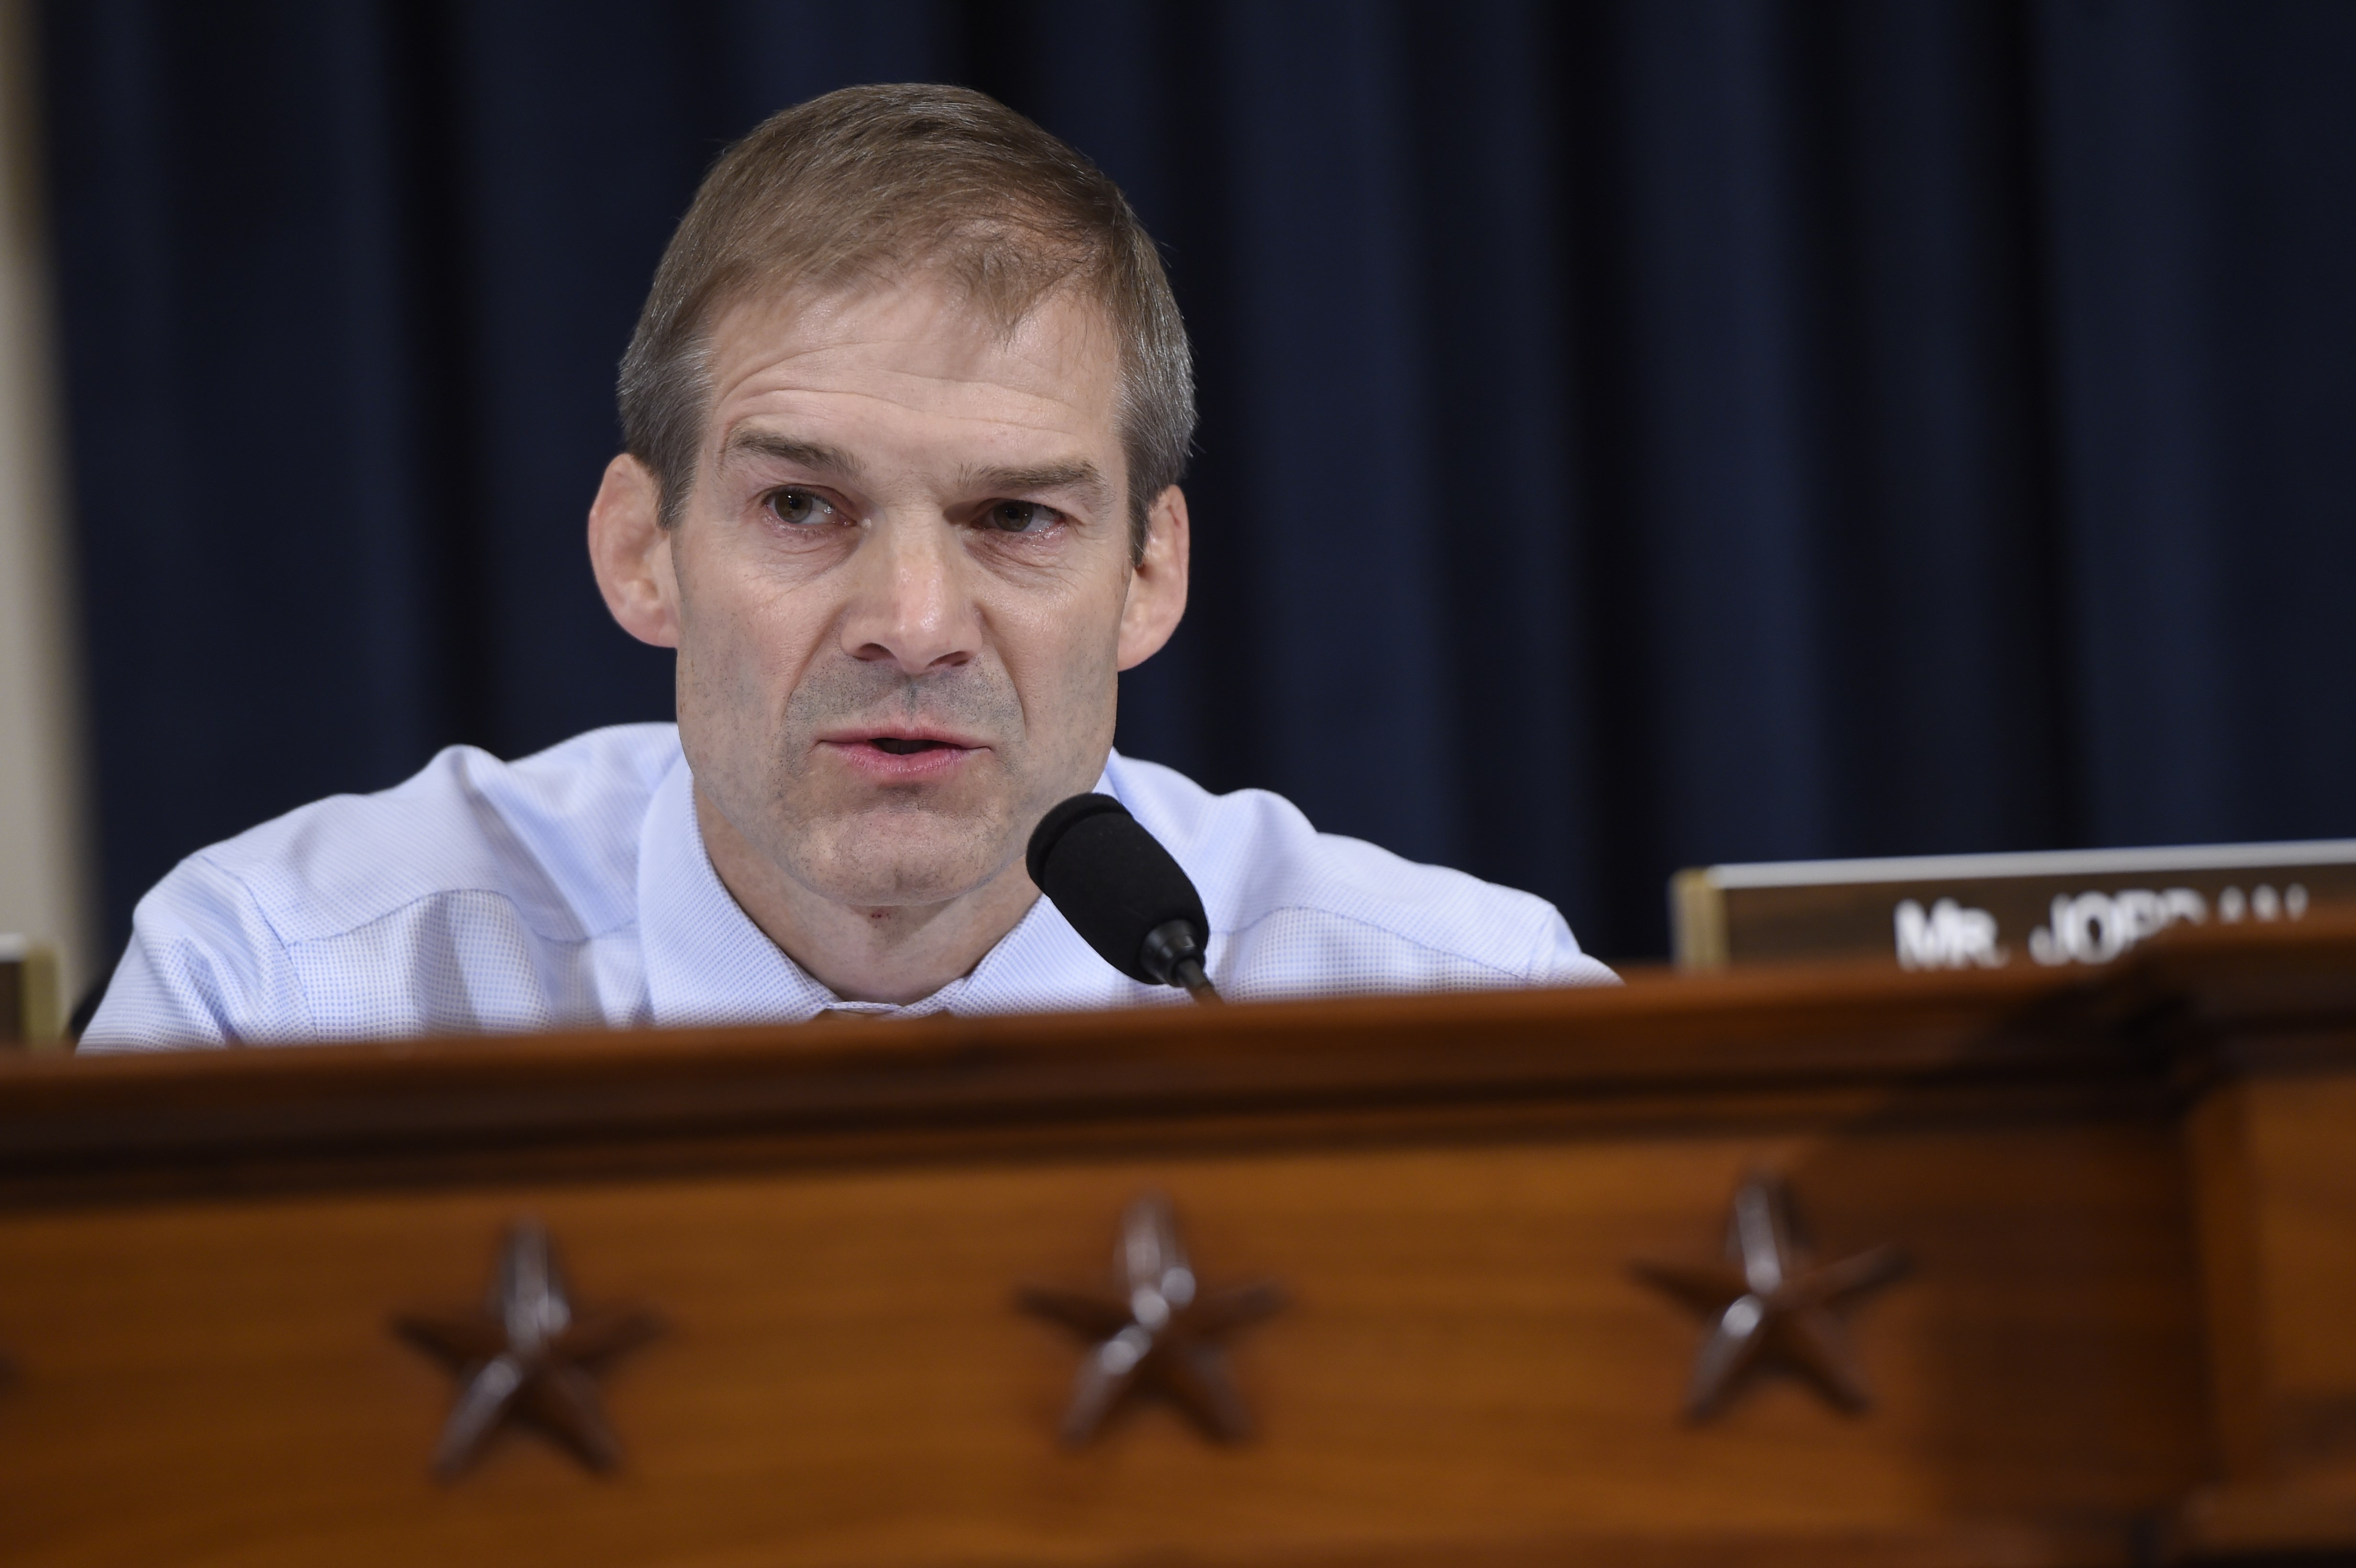 Republican US Representative from Ohio Jim Jordan questions former US Secretary of State and Democratic Presidential hopeful Hillary Clinton as she testifies before the House Select Committee on Benghazi on Capitol Hill in Washington, DC, October 22, 2015. (SAUL LOEB/AFP/Getty Images)